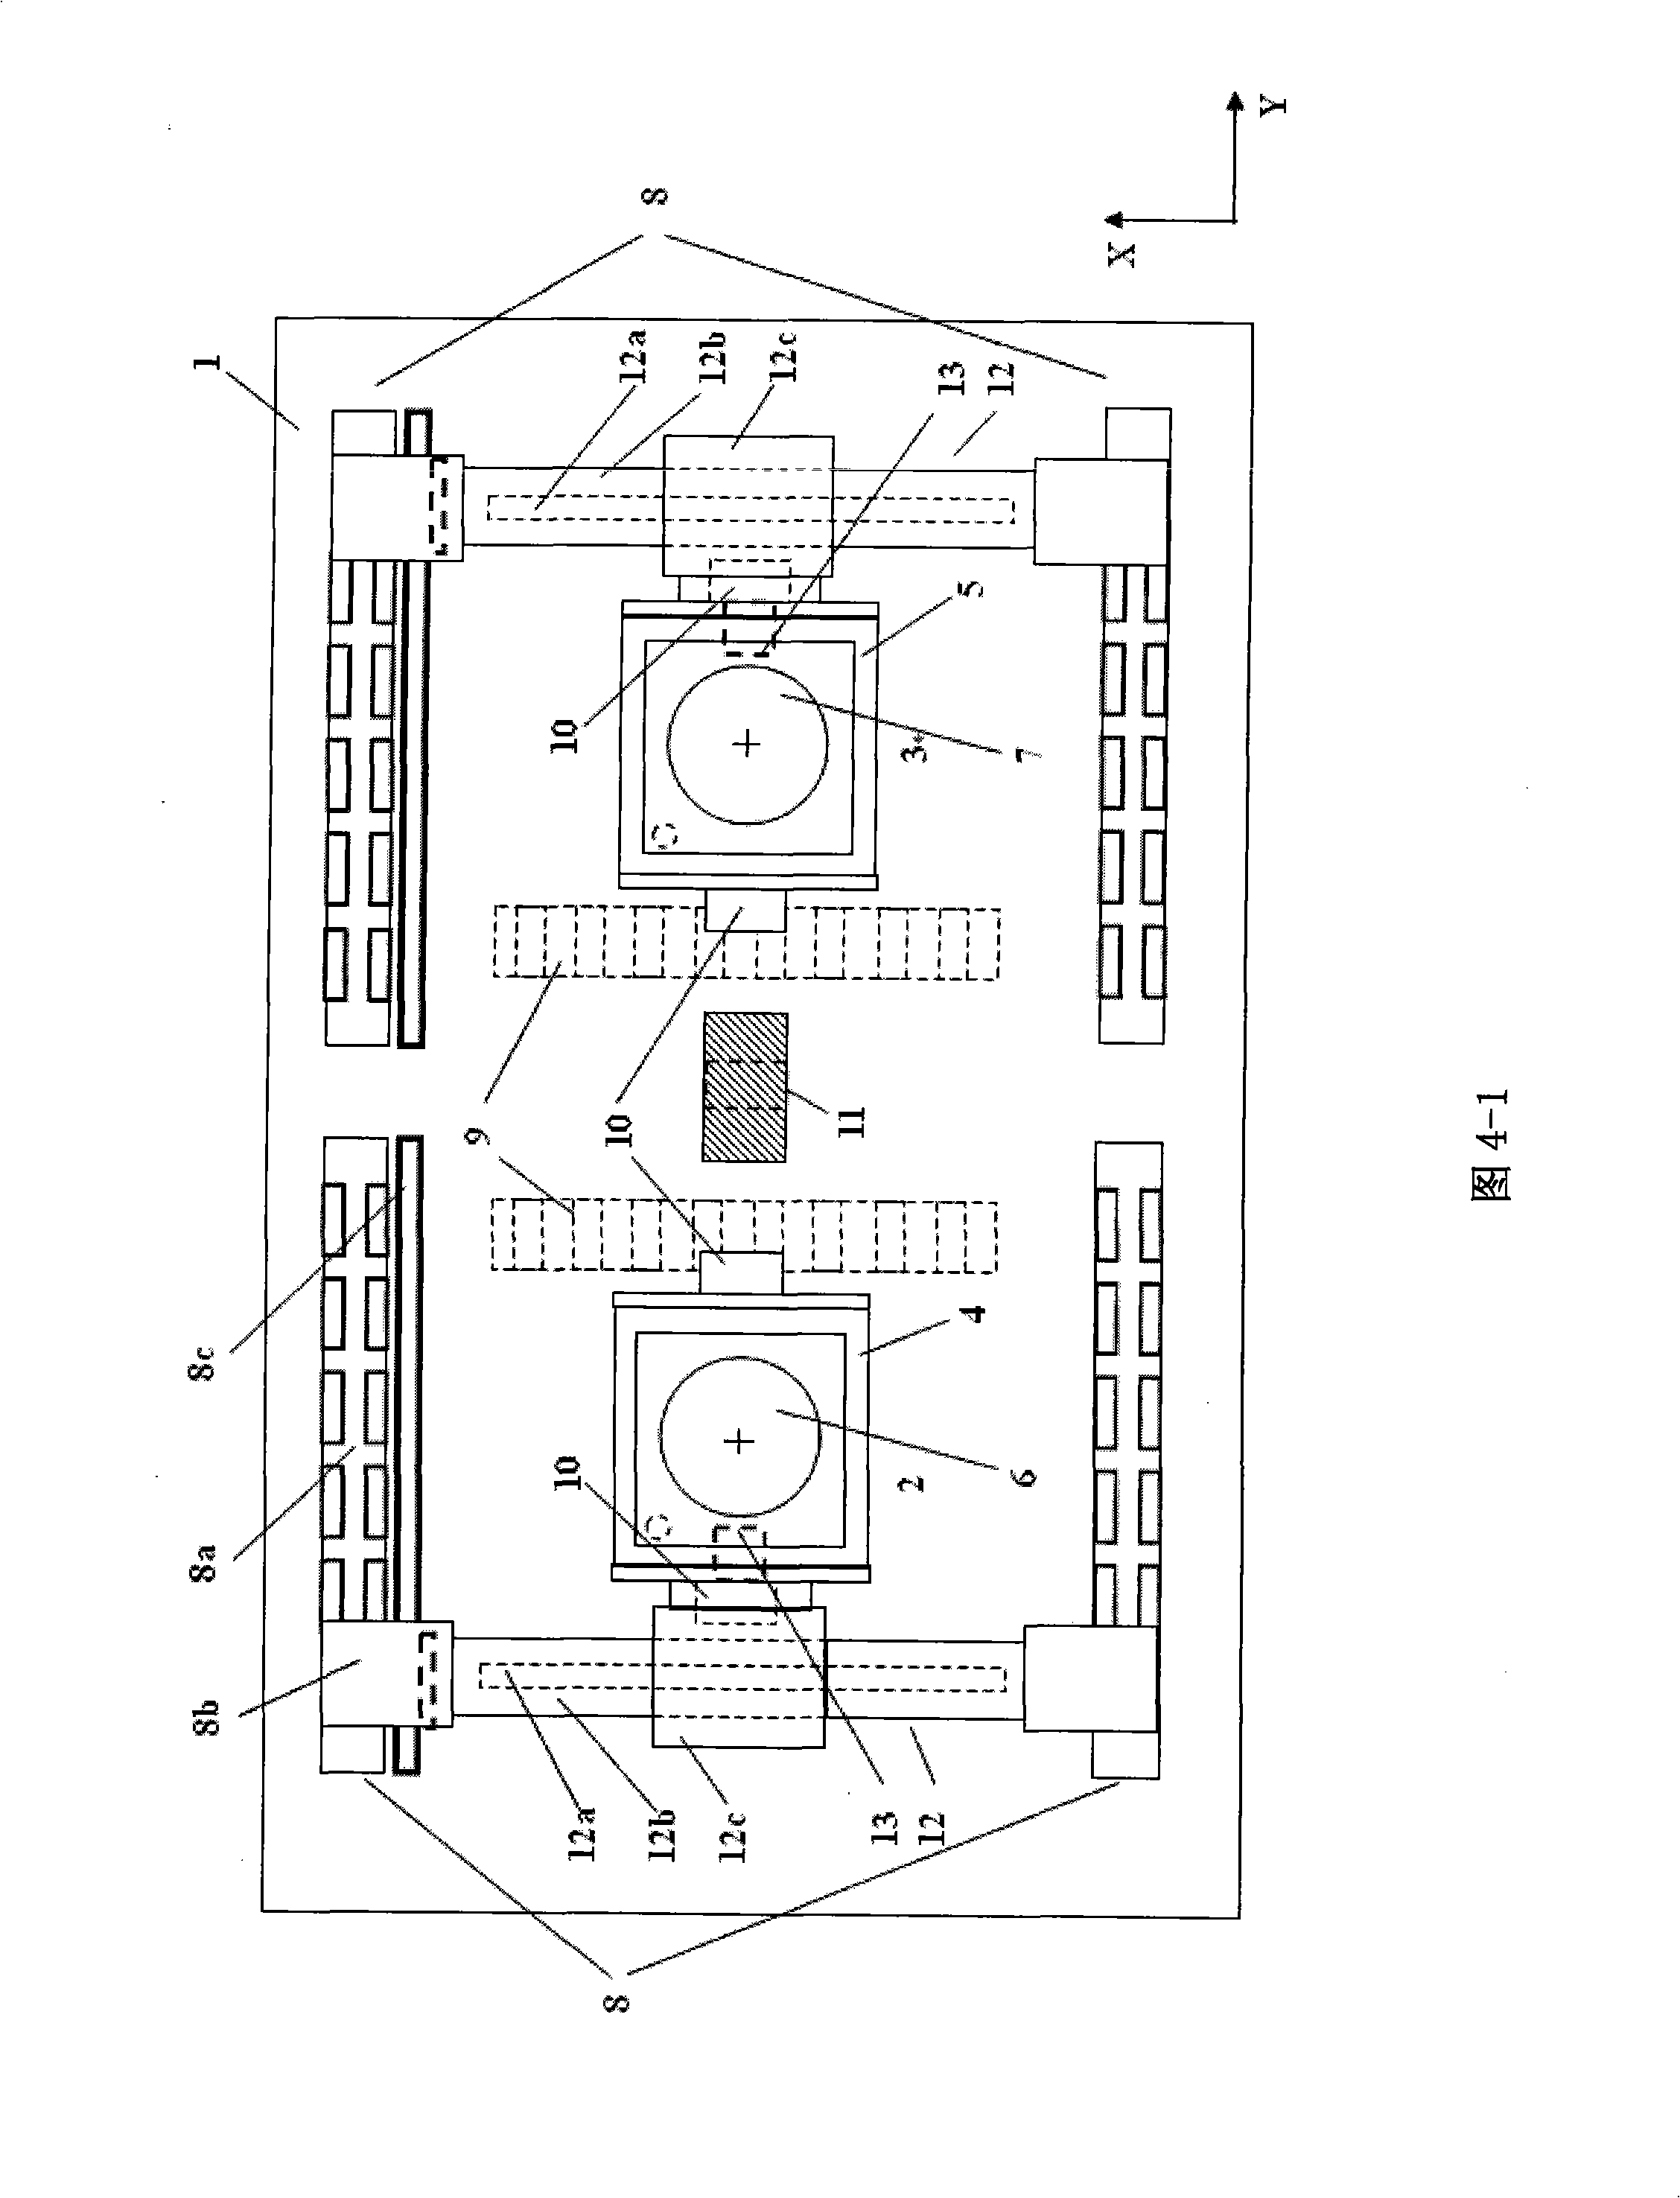 Embedded type common basal plane two-dimension balance double-drive double-workpiece platform positioning system